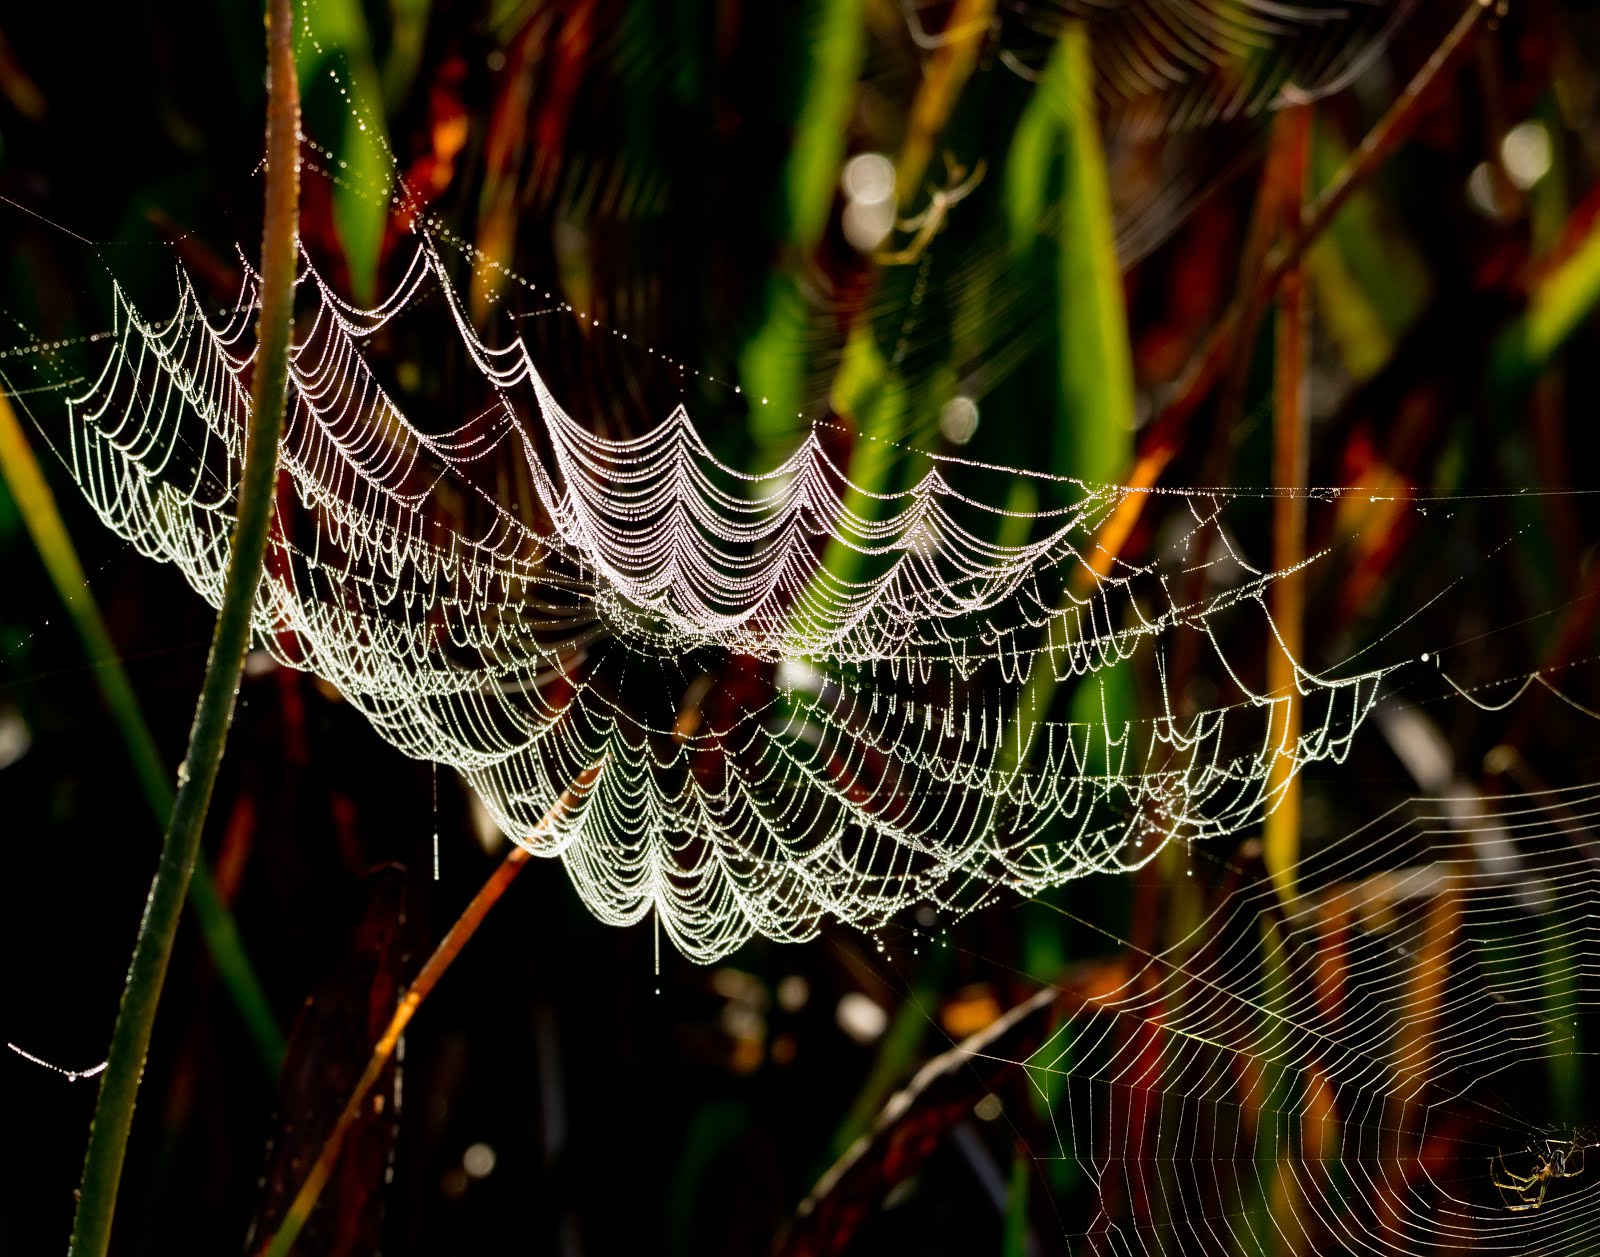 Morning Dew on a web.